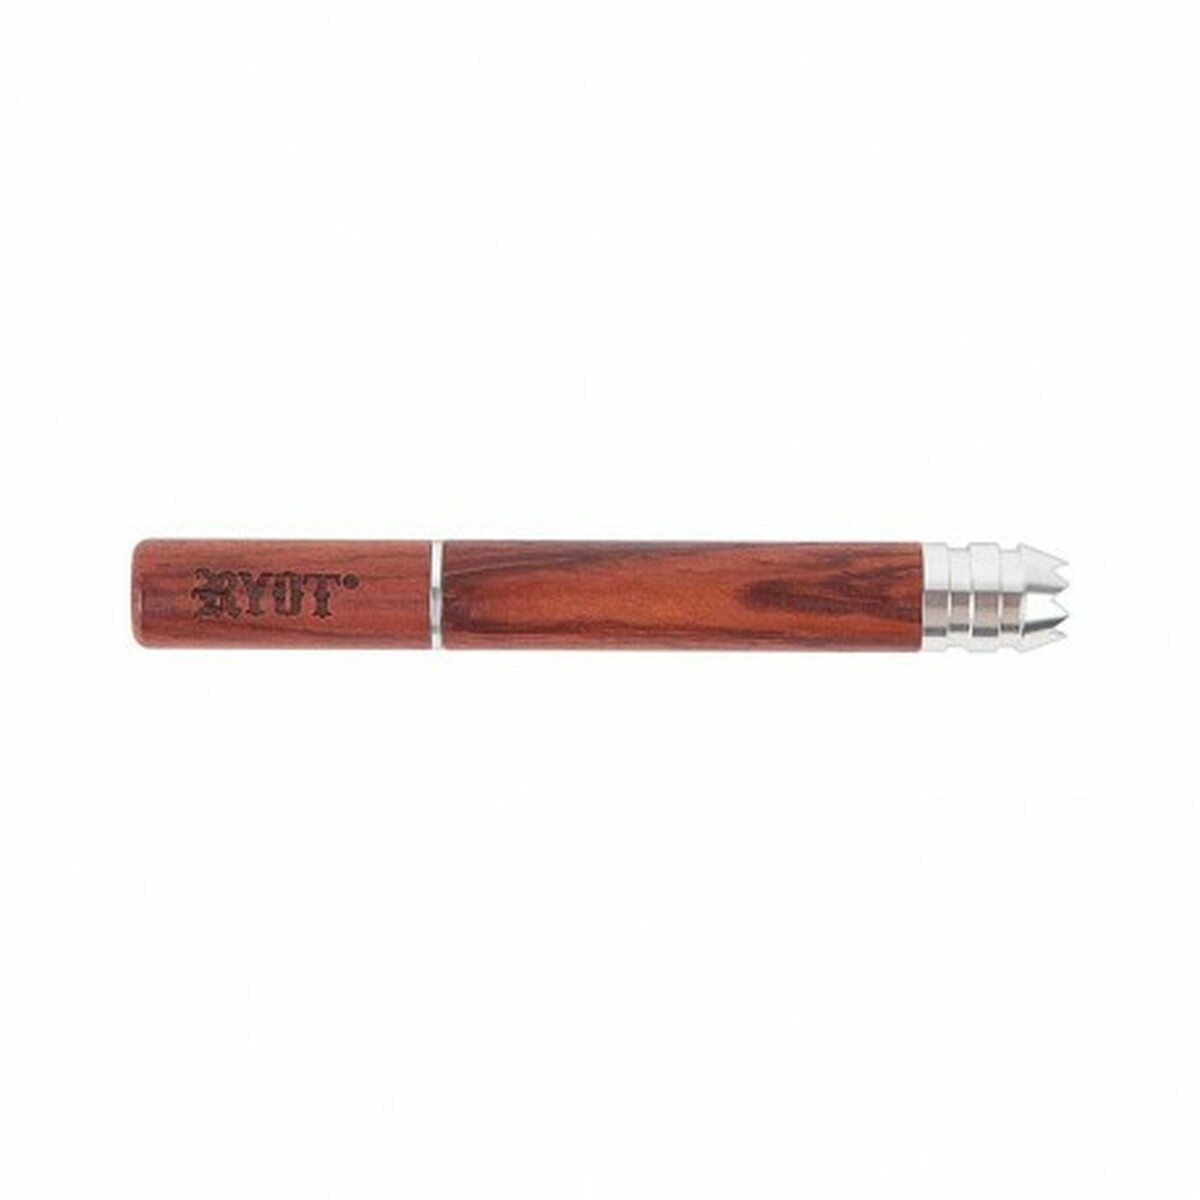 RYOT LARGE (3") WOOD TASTER TWIST WITH DIGGER TIP